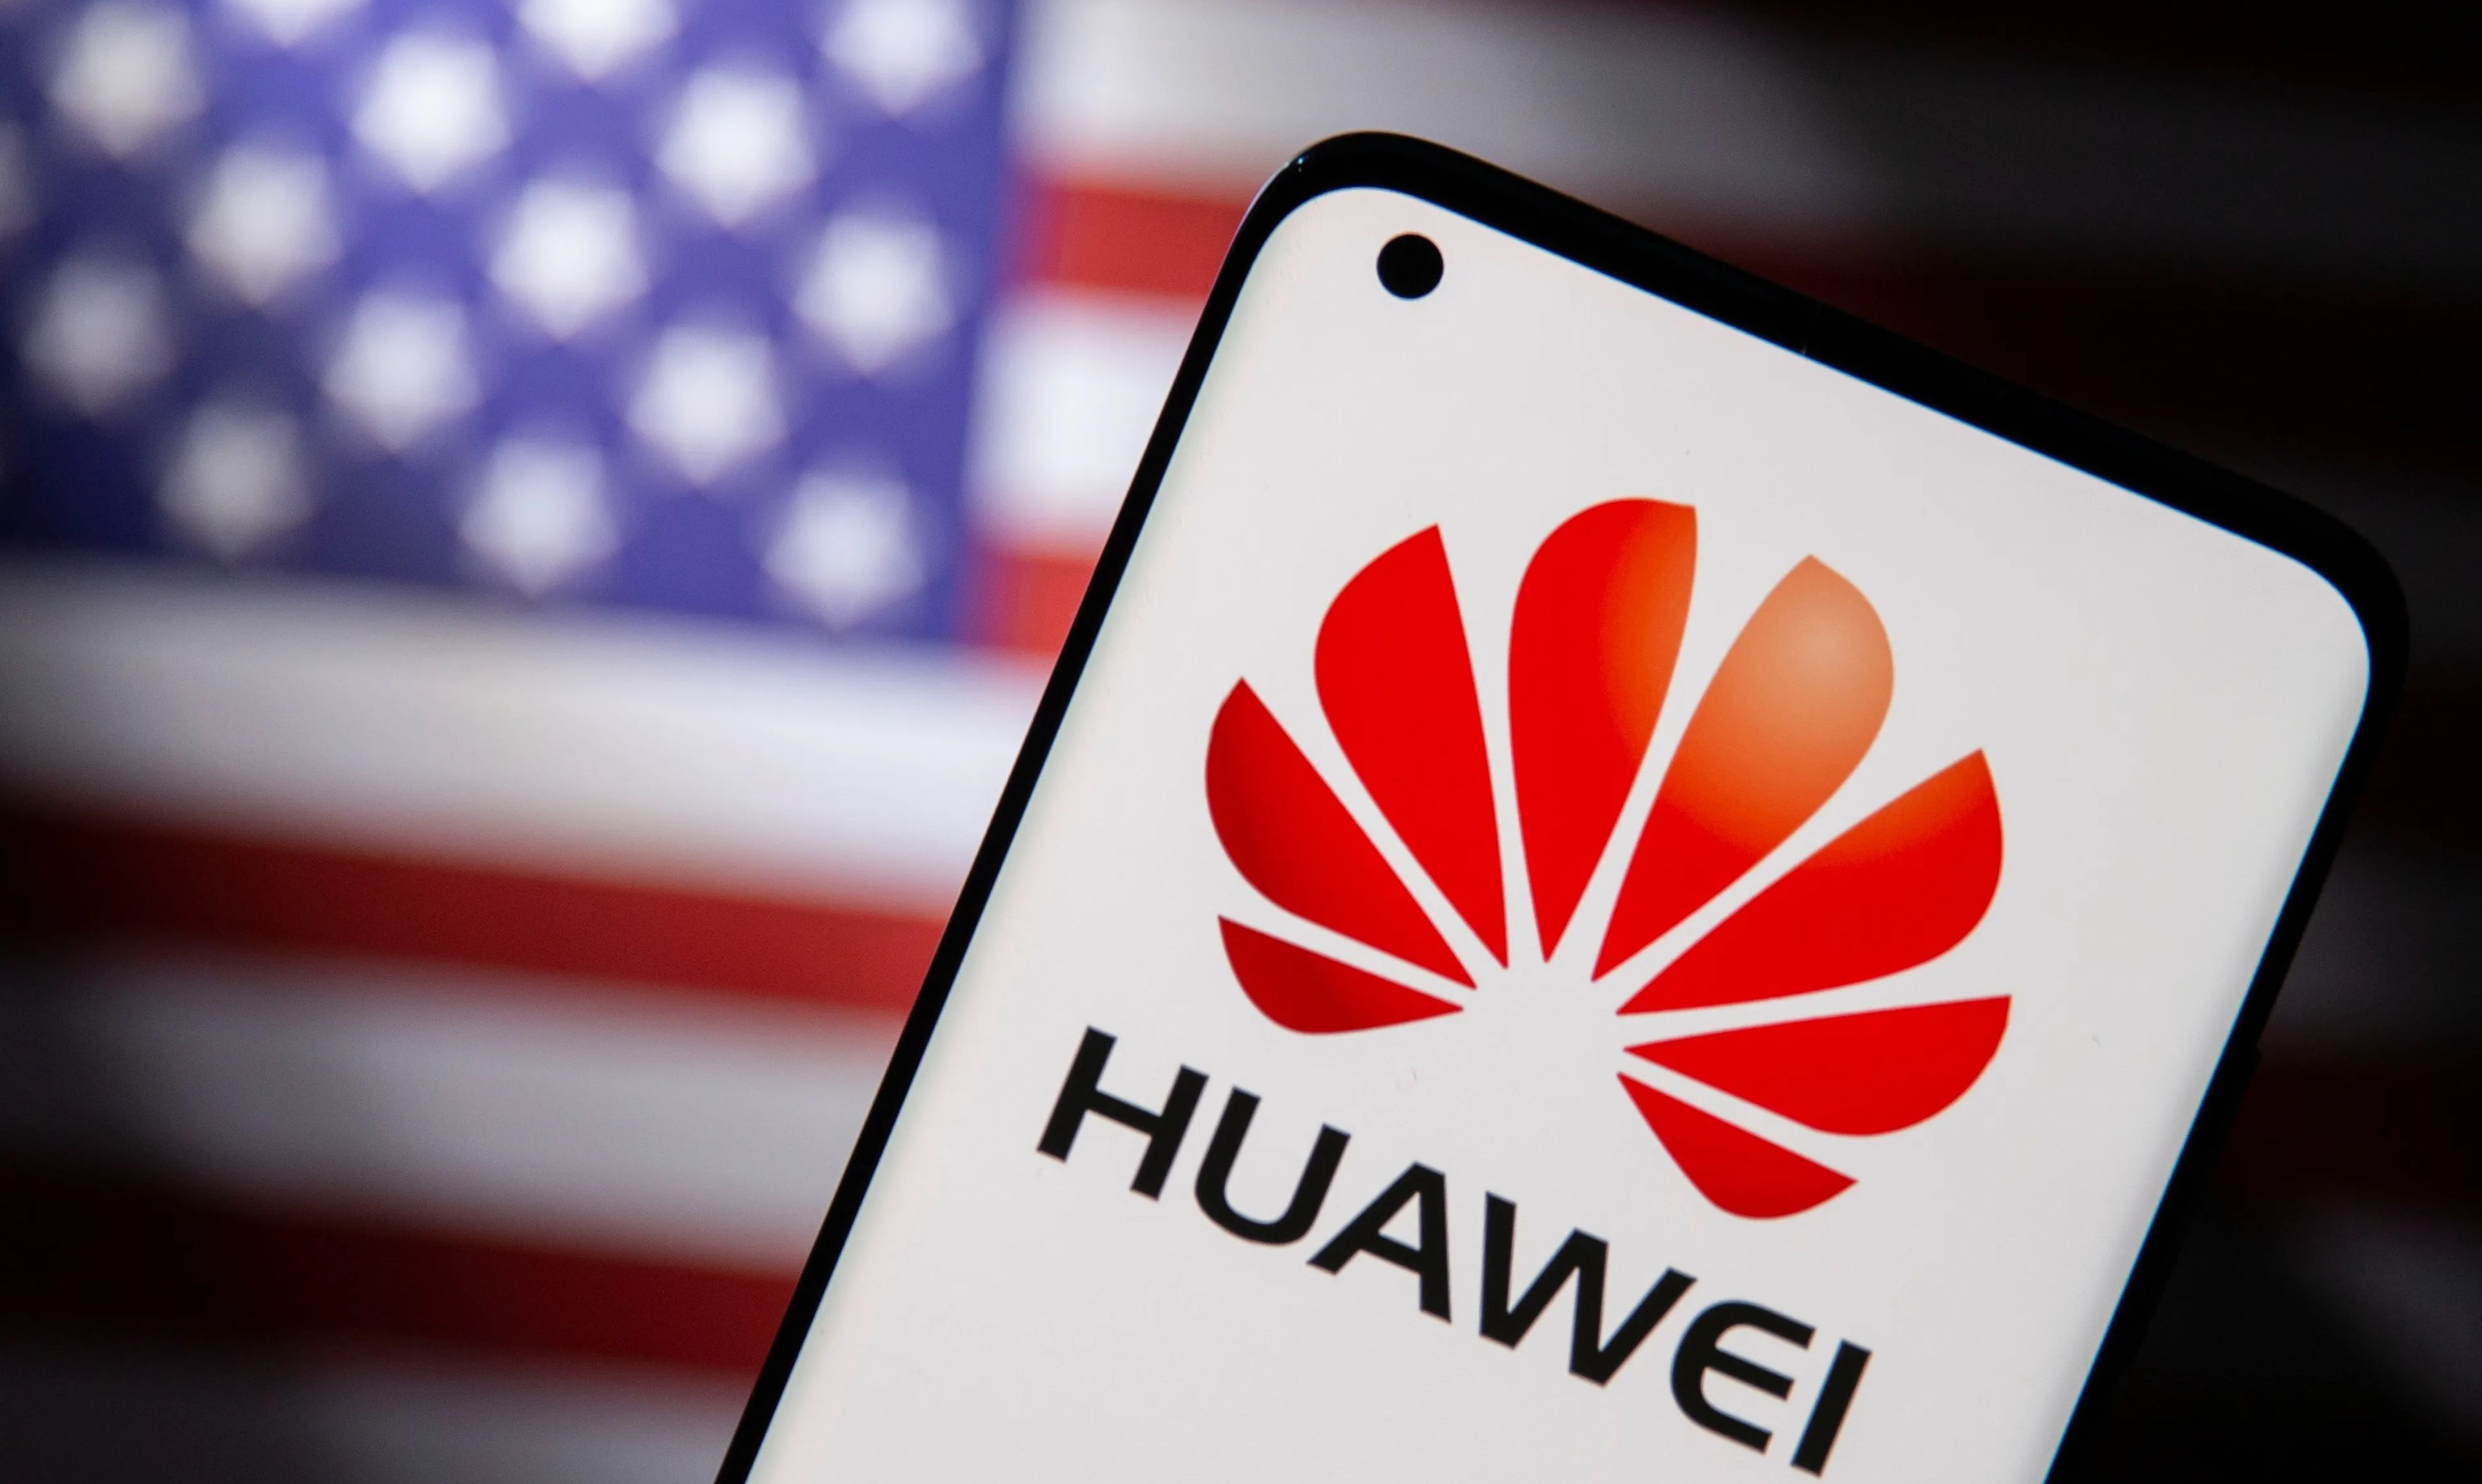 Huawei logo and the United States flag